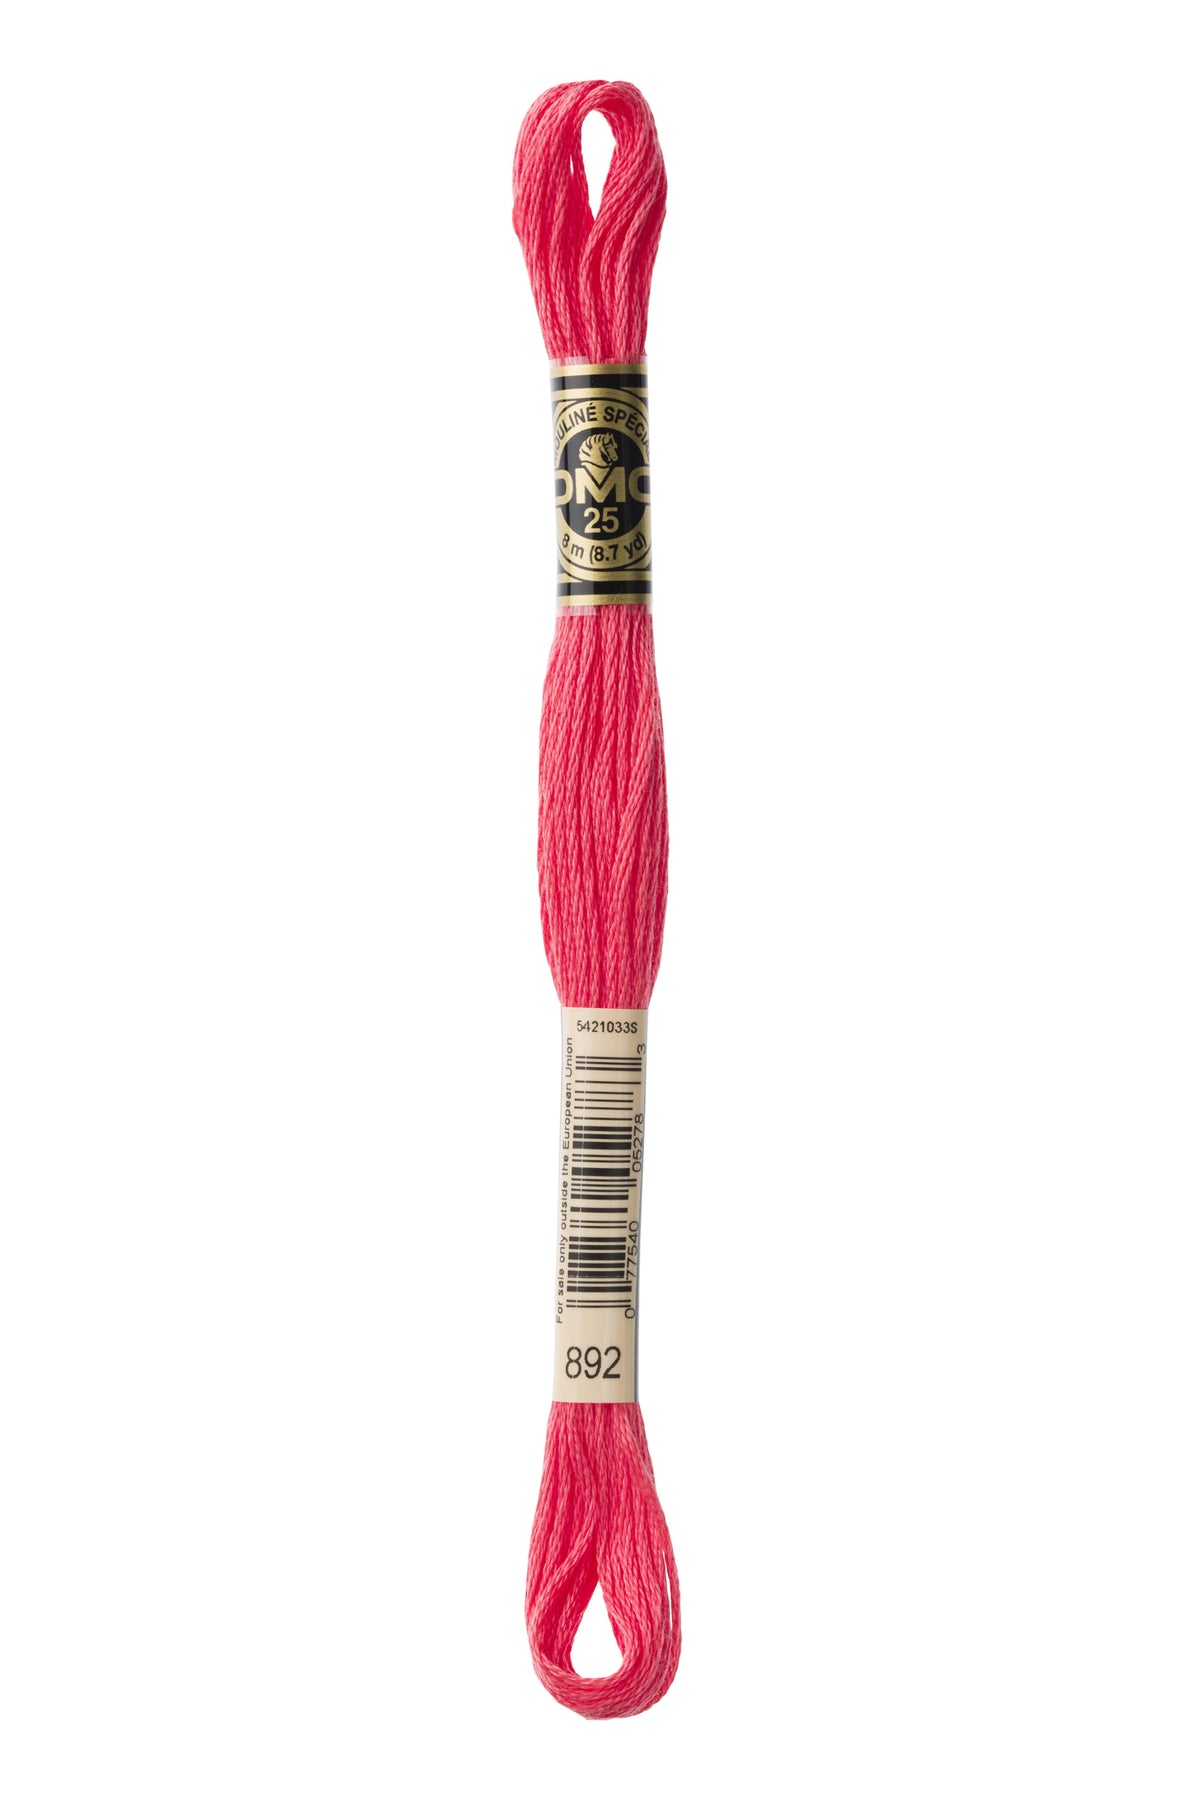 Cotton Six Stranded Embroidery Floss | DMC 703-915